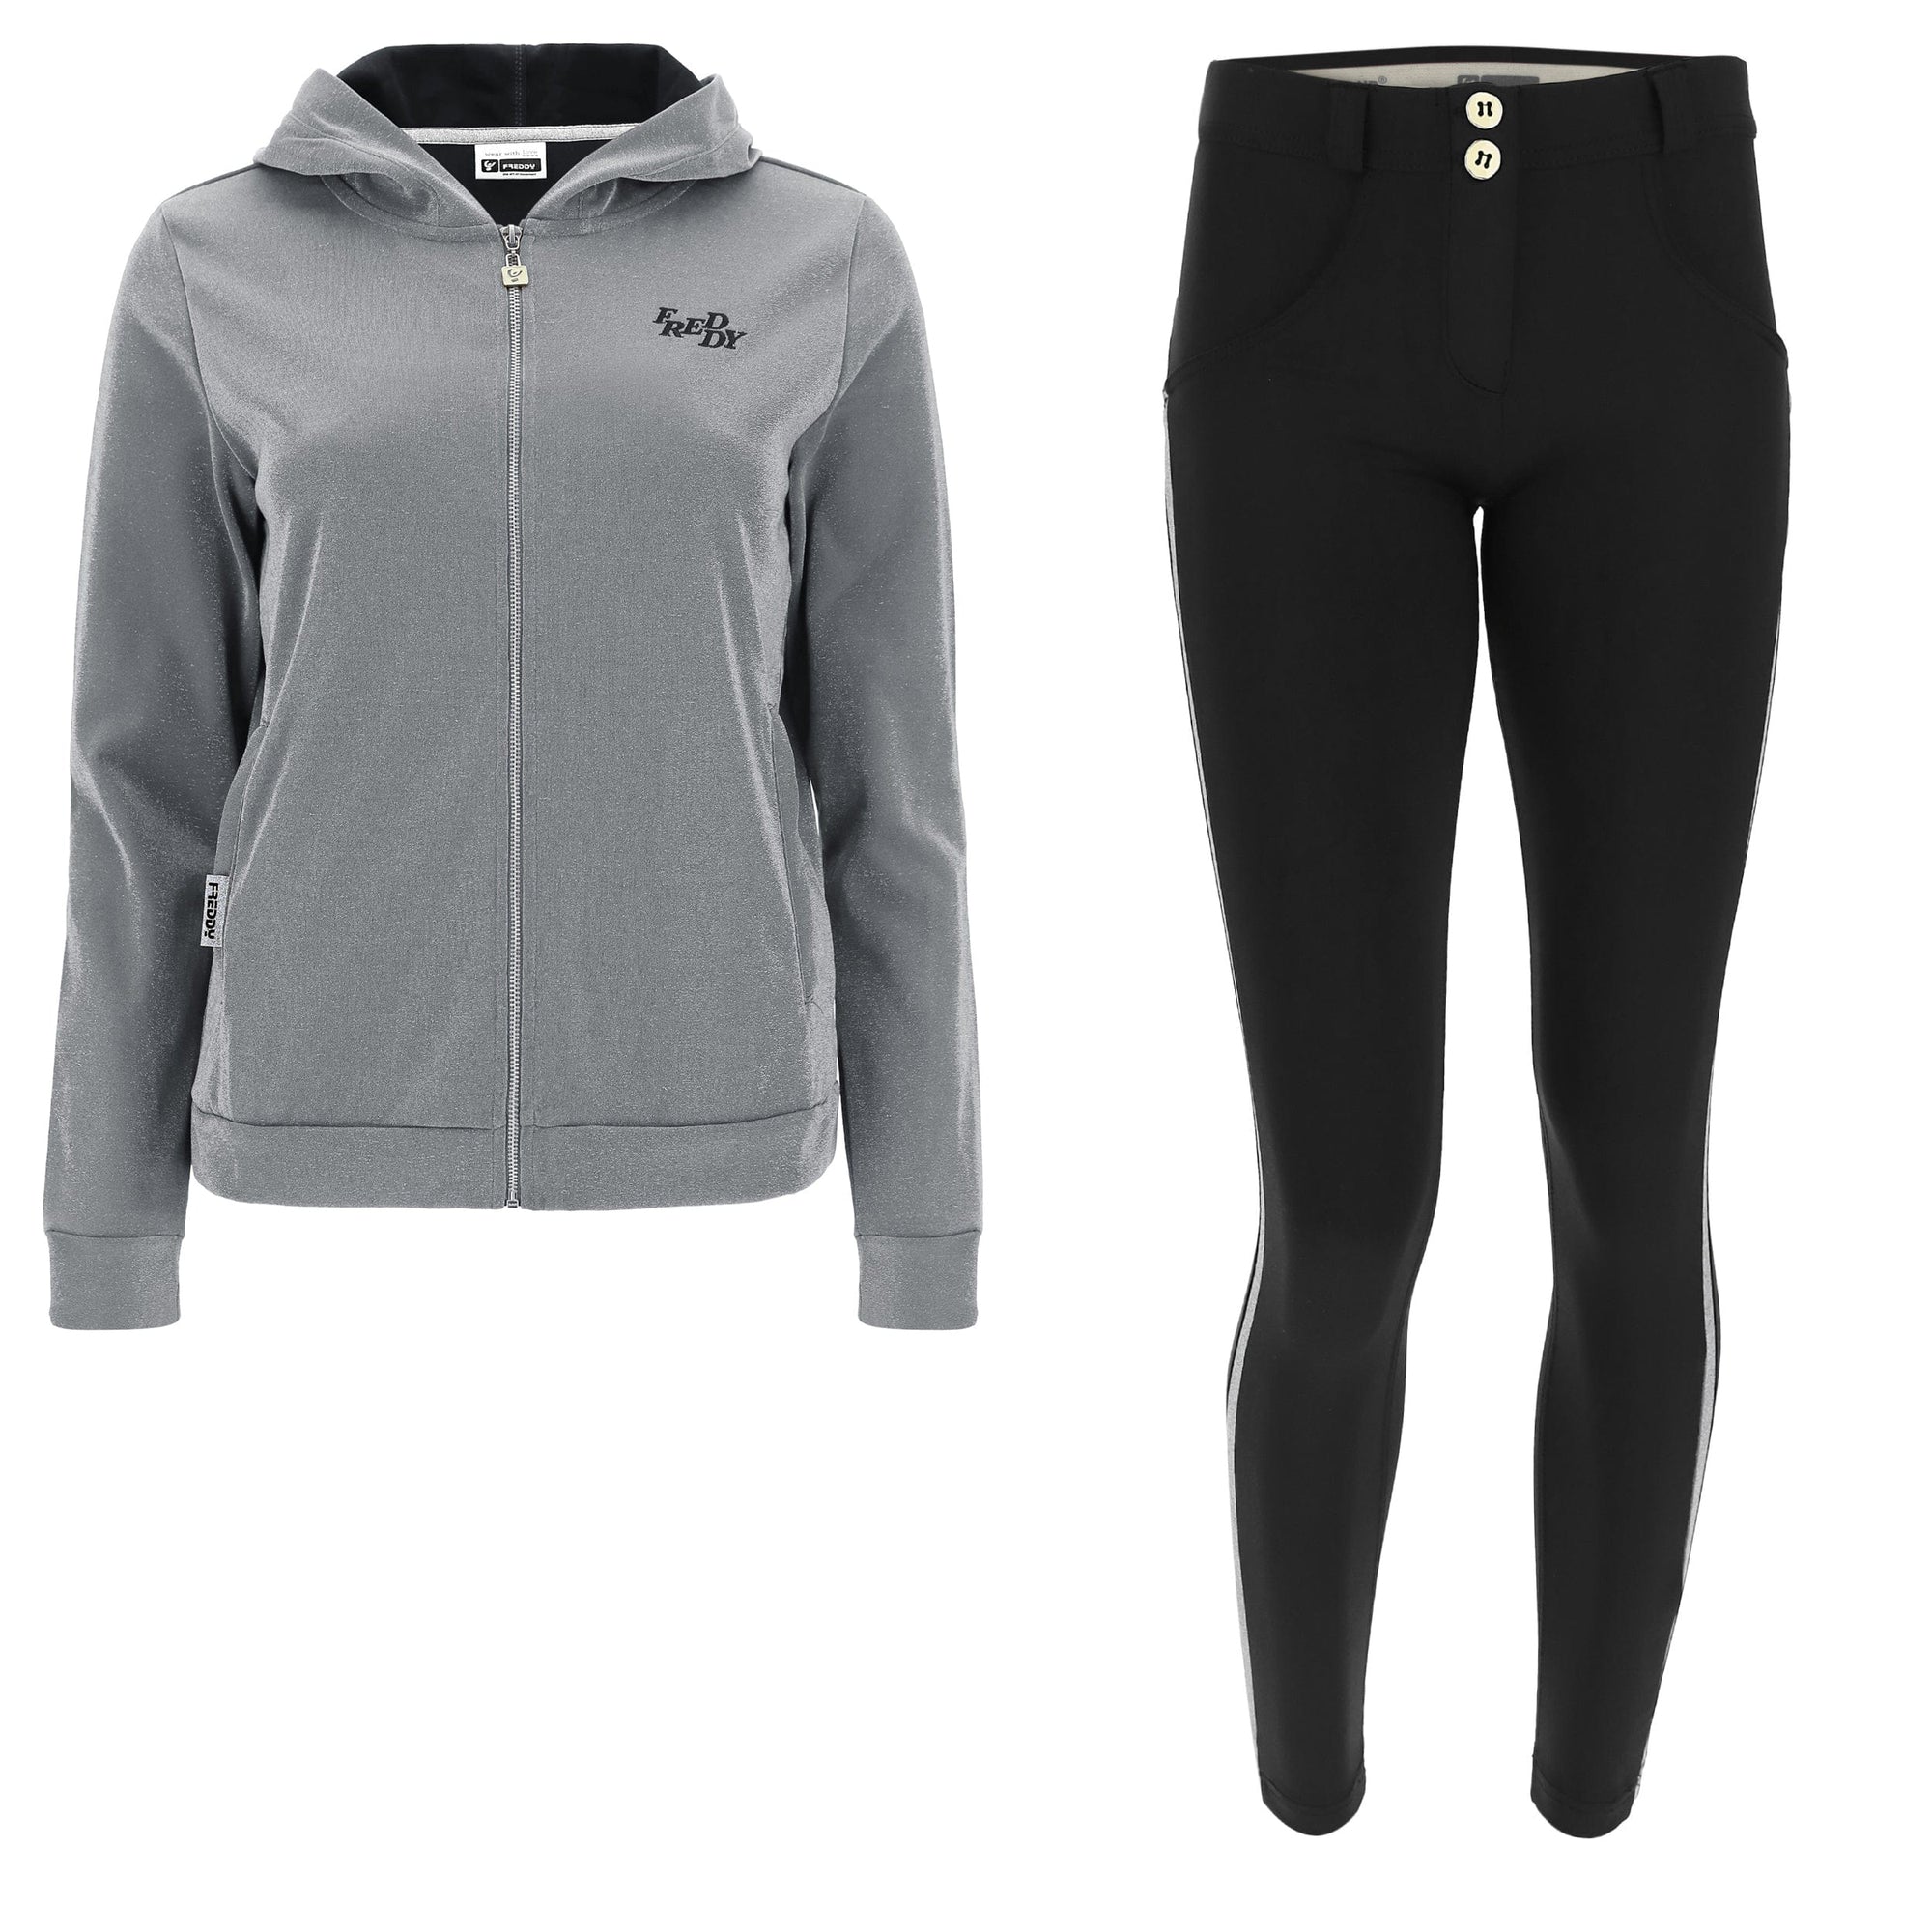 WR.UP® Tracksuit with Lurex Sweatshirt - Mid waist - Ankle Length - Lurex Silver + Black 1